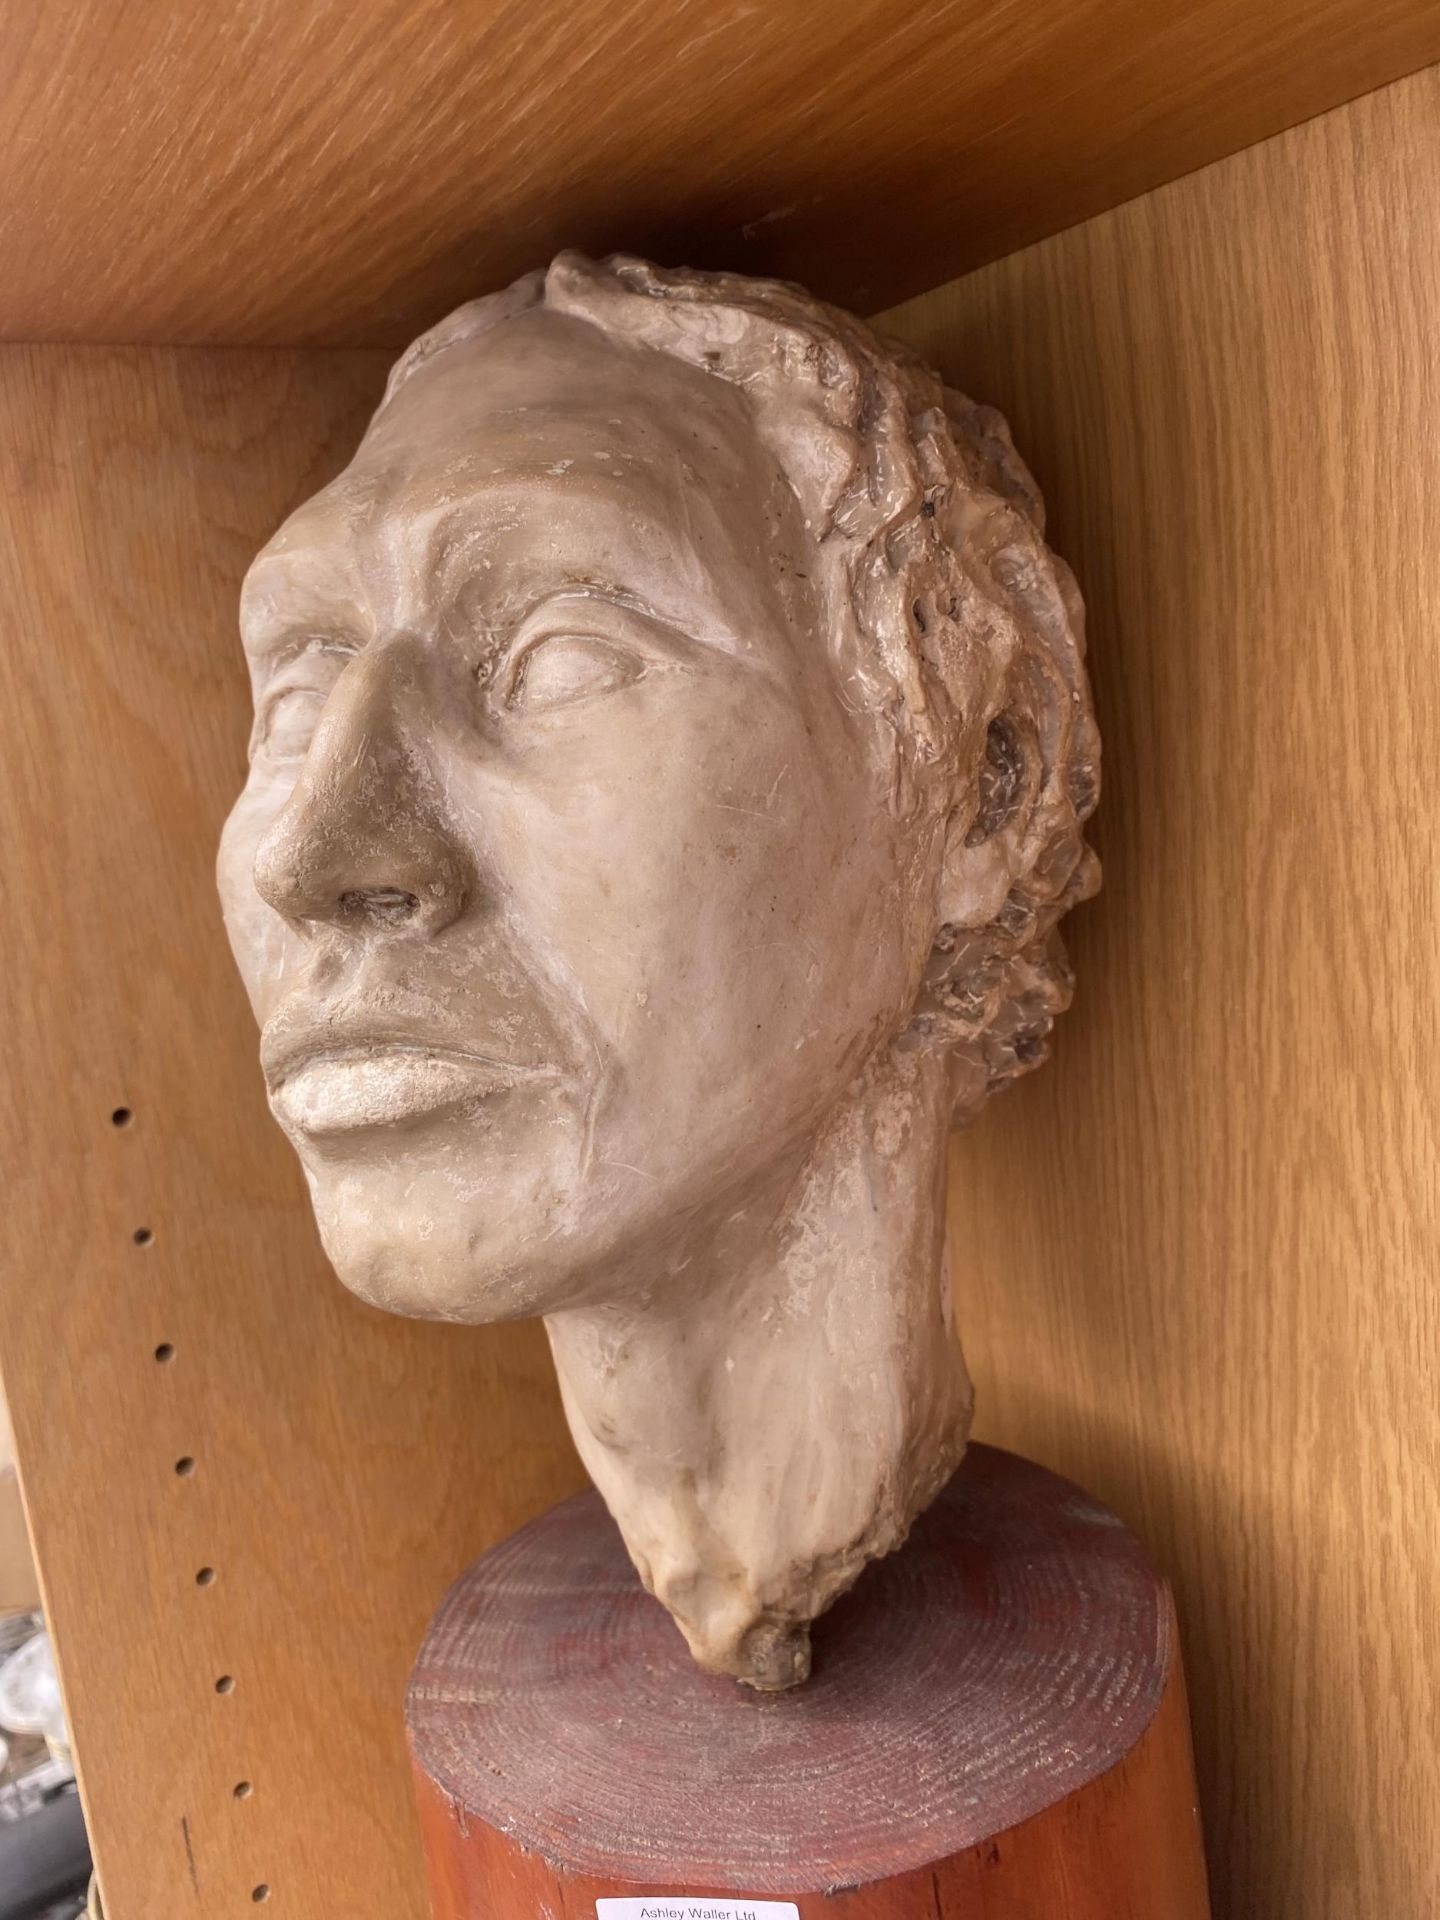 A RESIN MALE BUST ON A WOODEN PLINTH BASE - Image 2 of 2